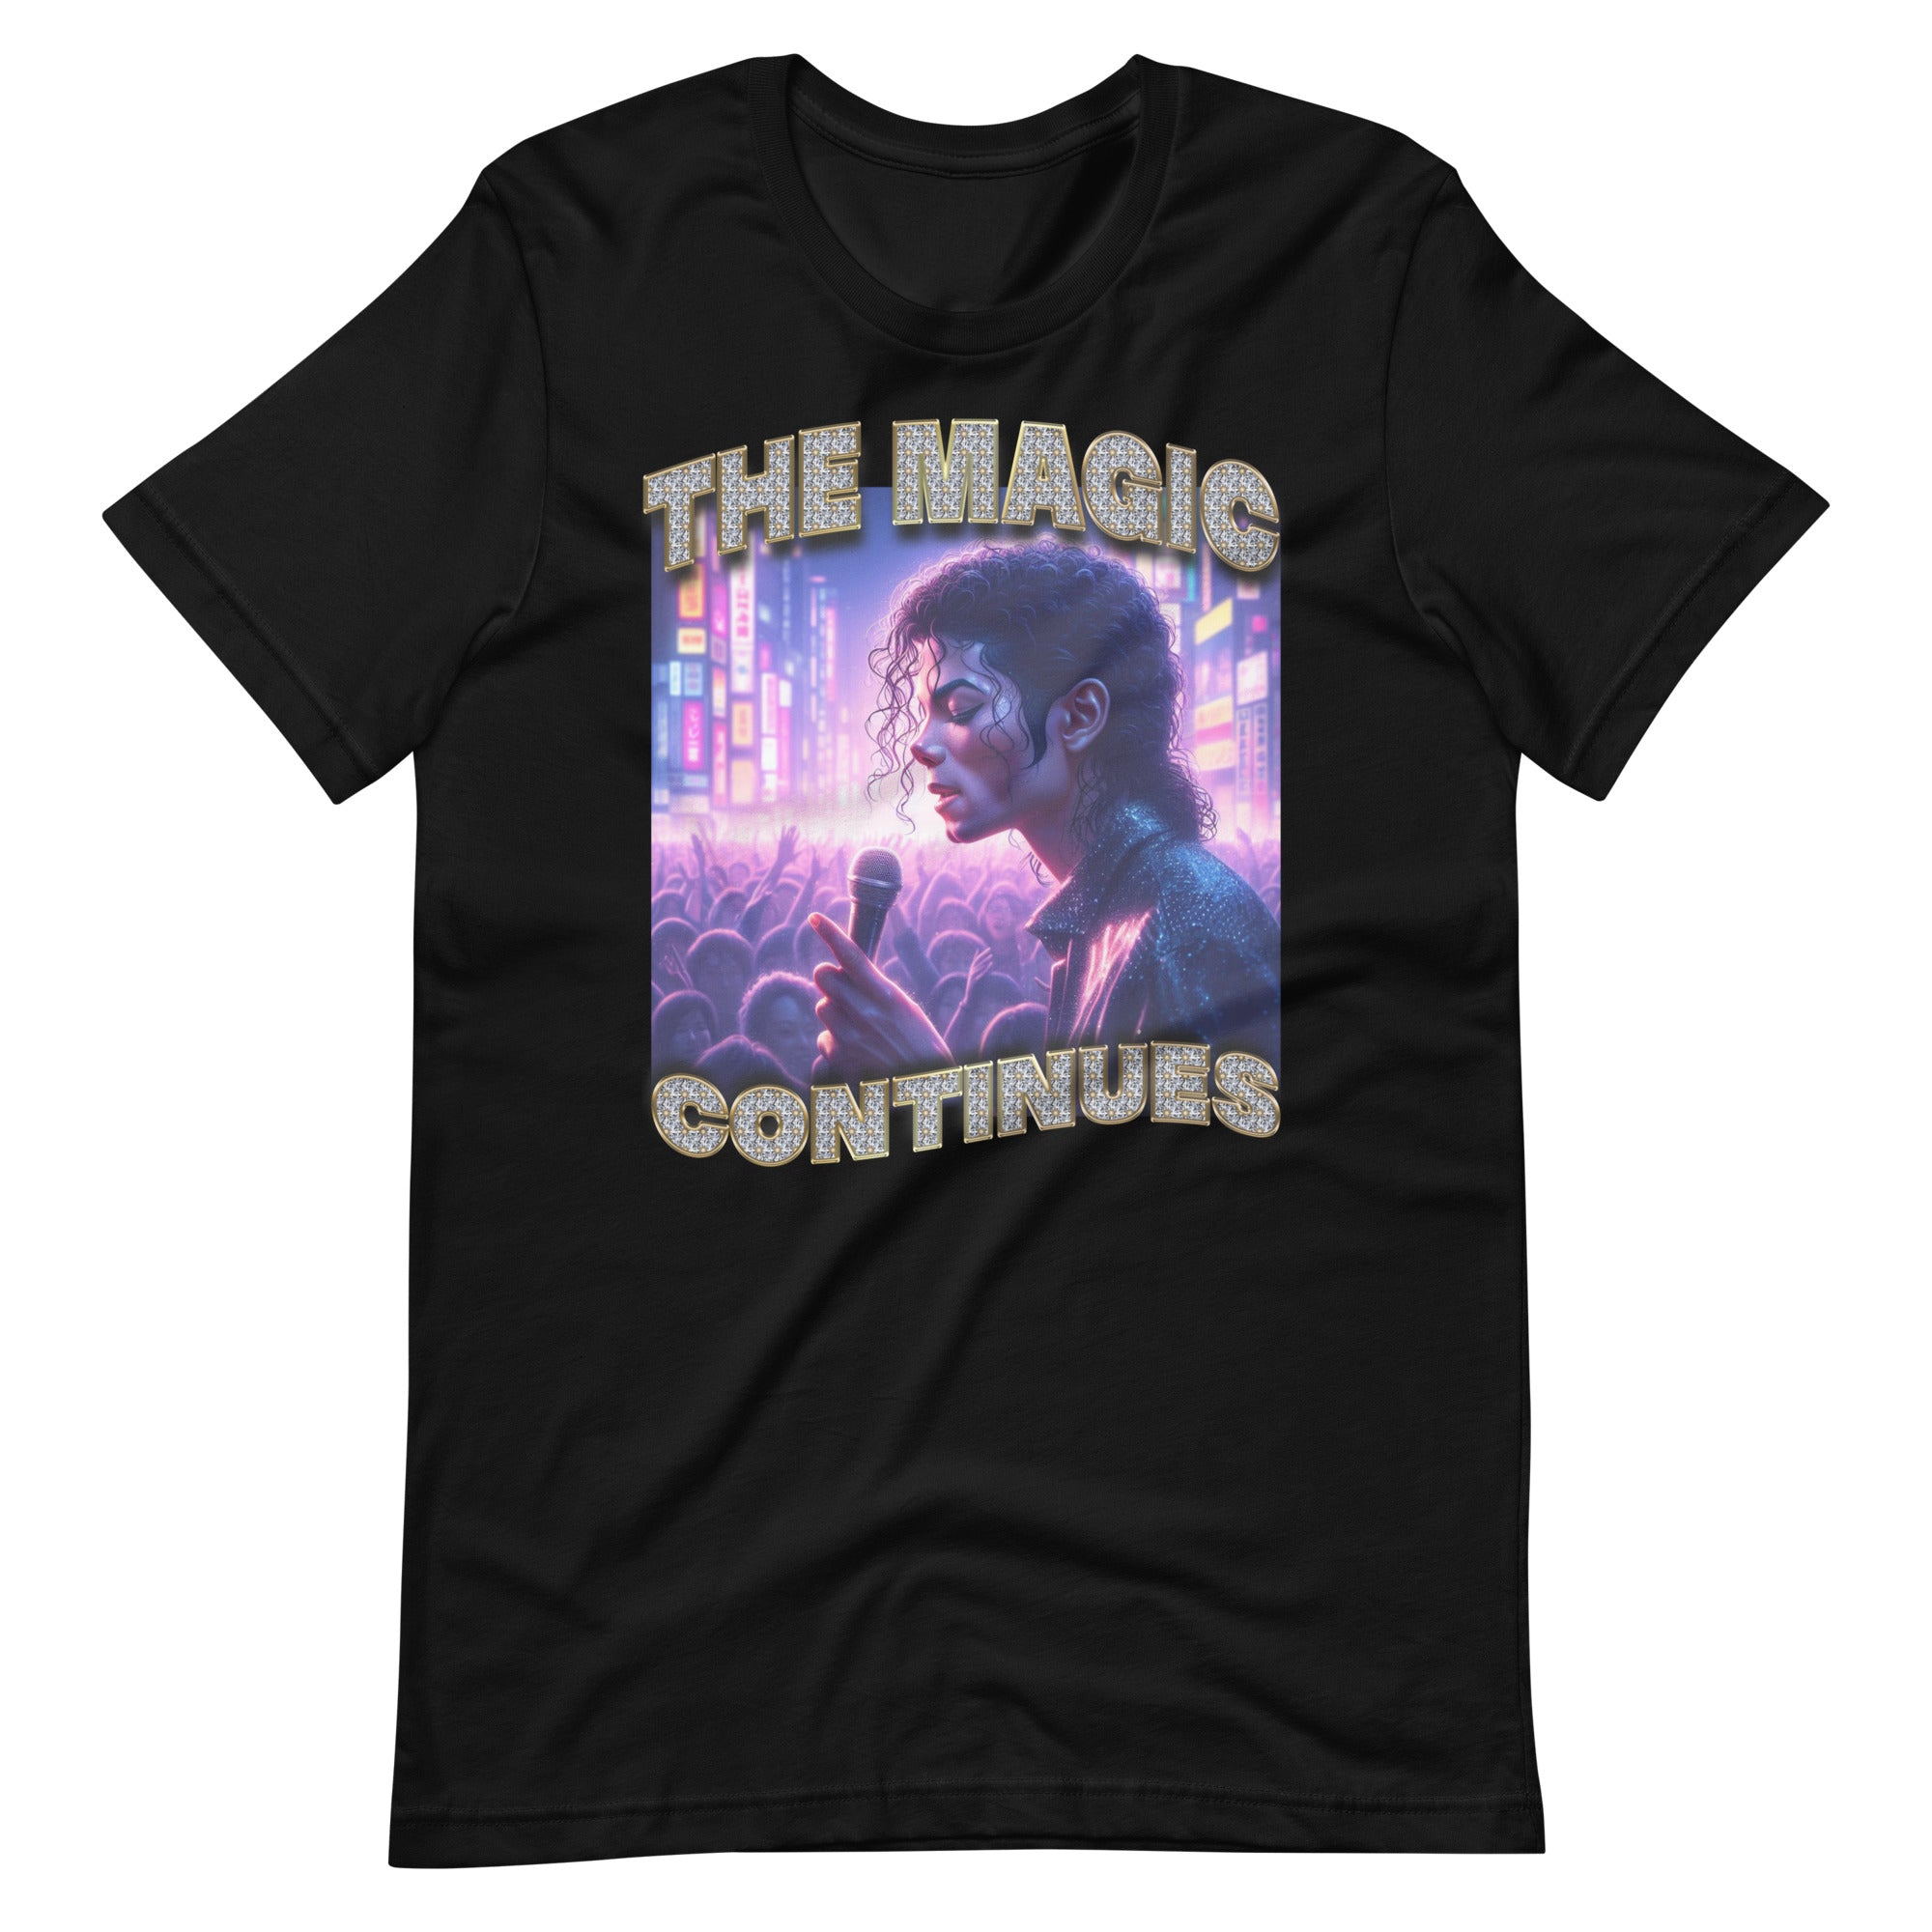 The Magic Continues Tee